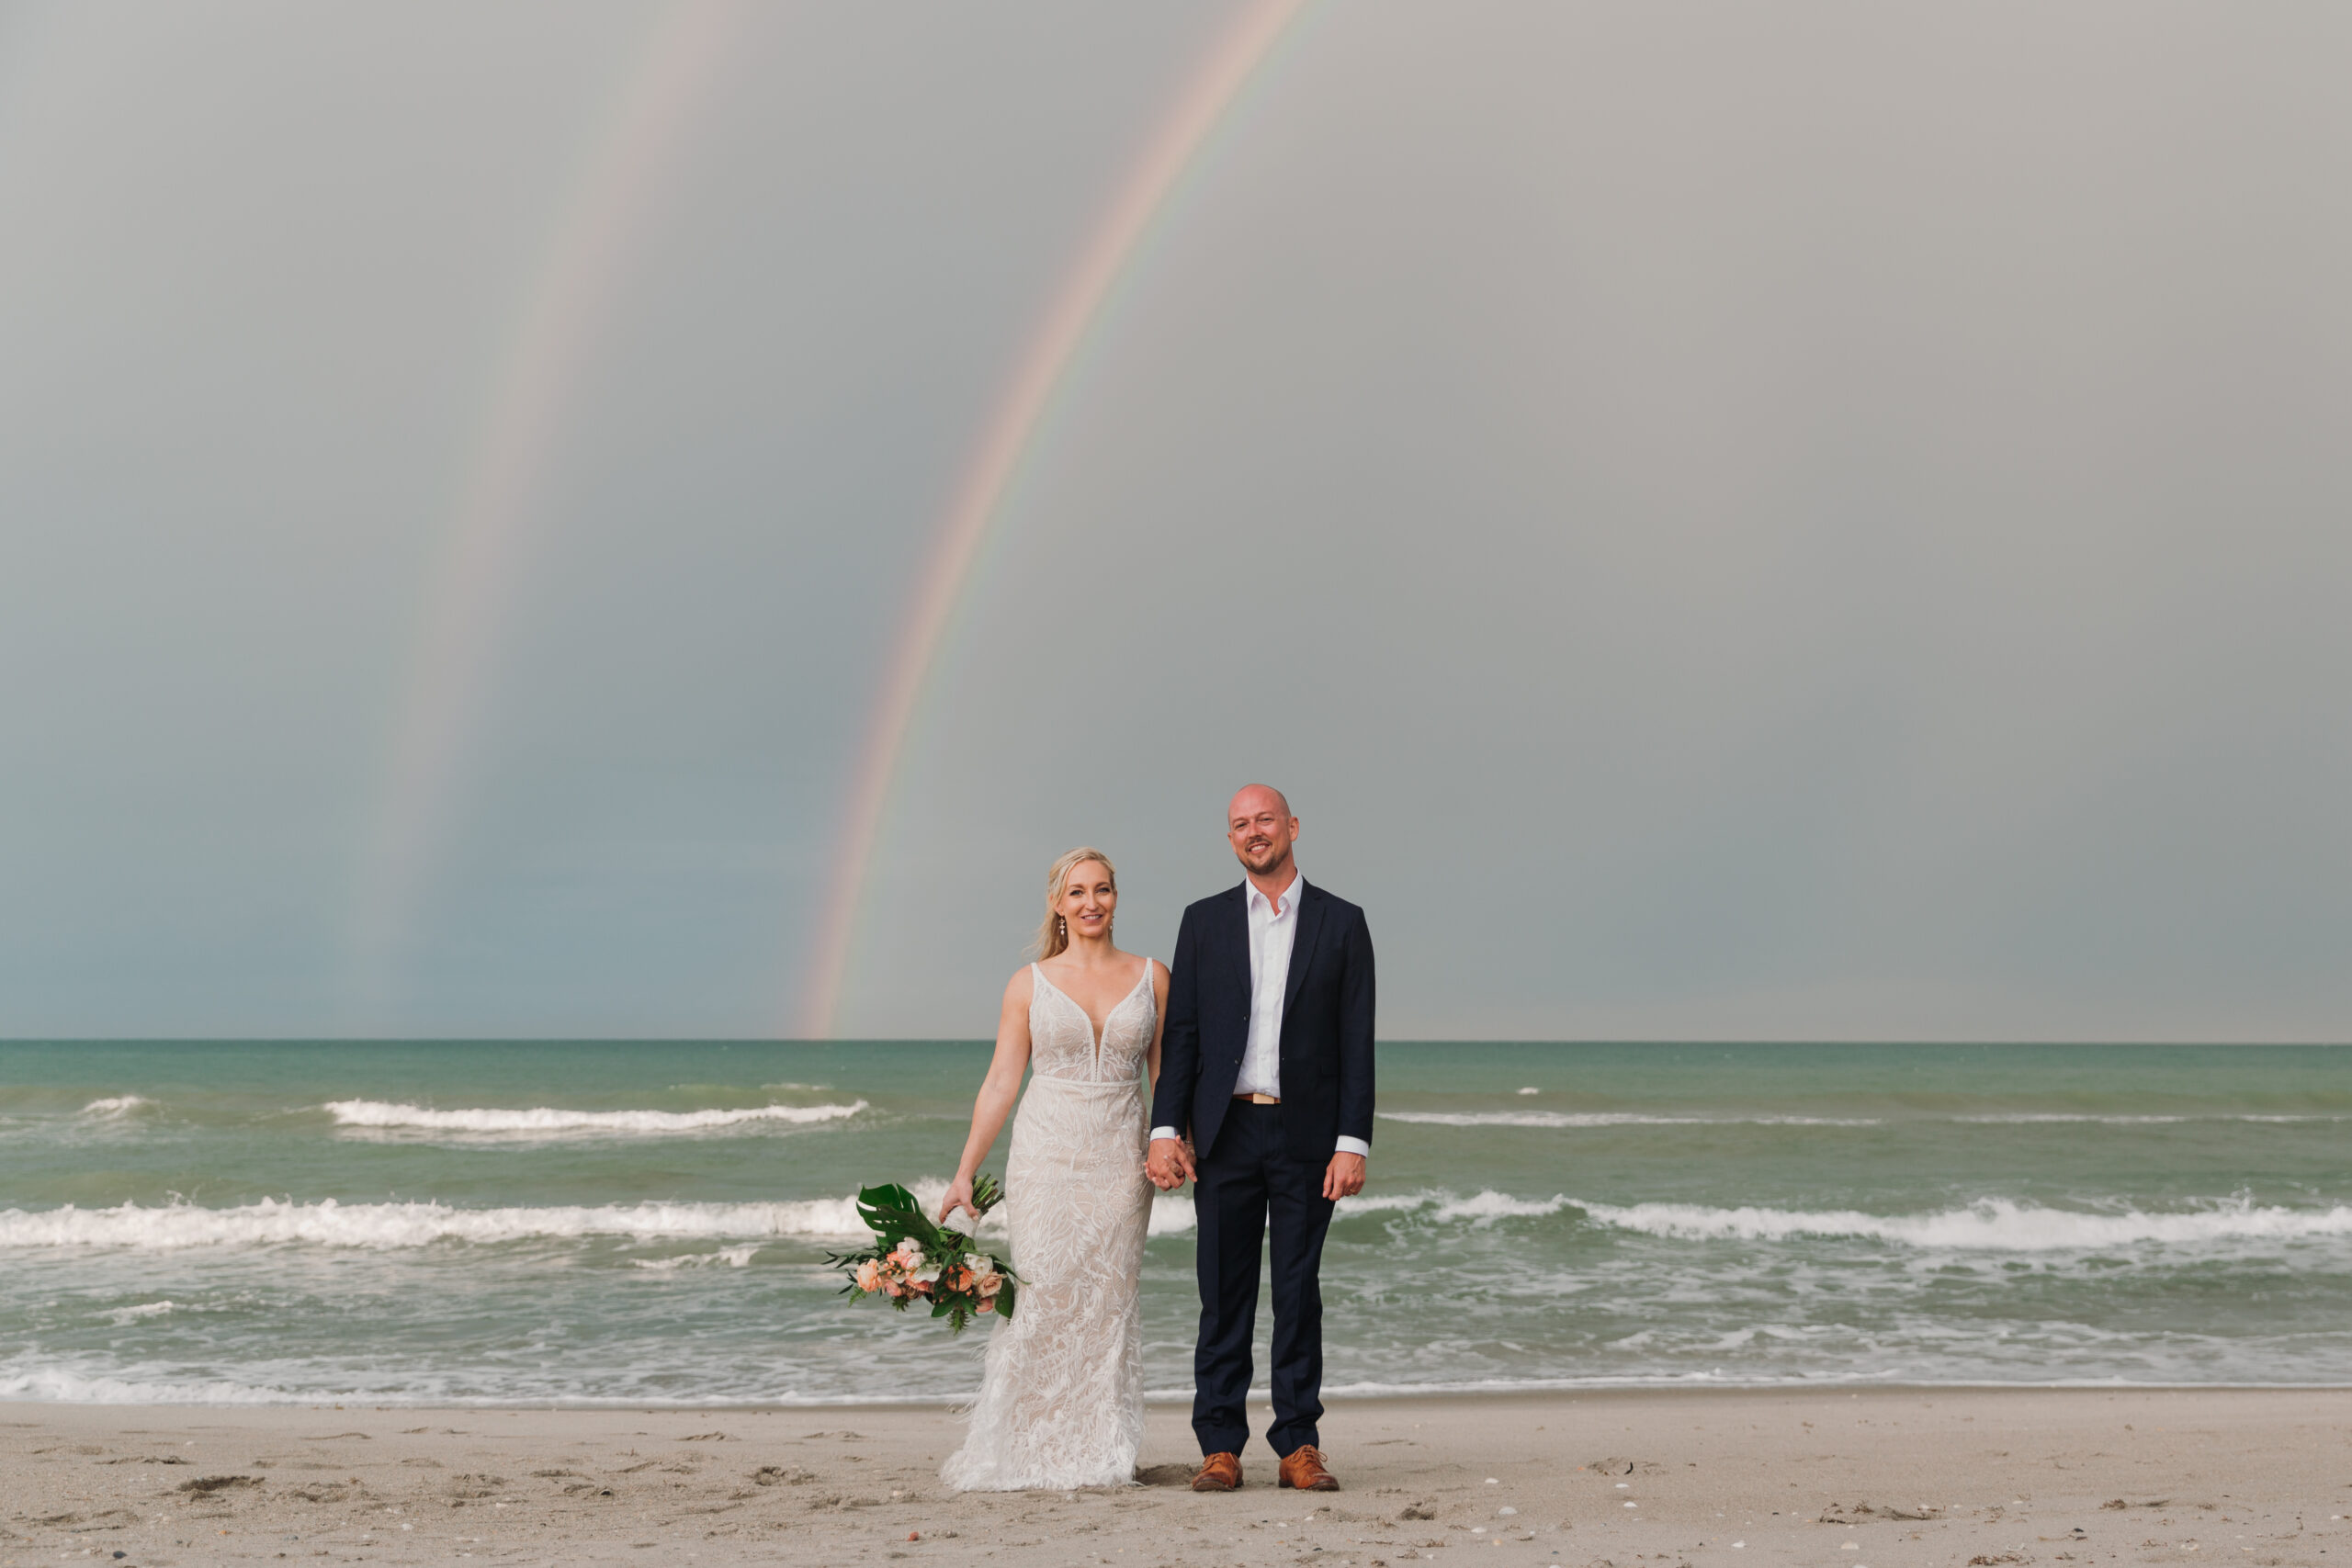 Wedding couple married under a rainbow by the ocean